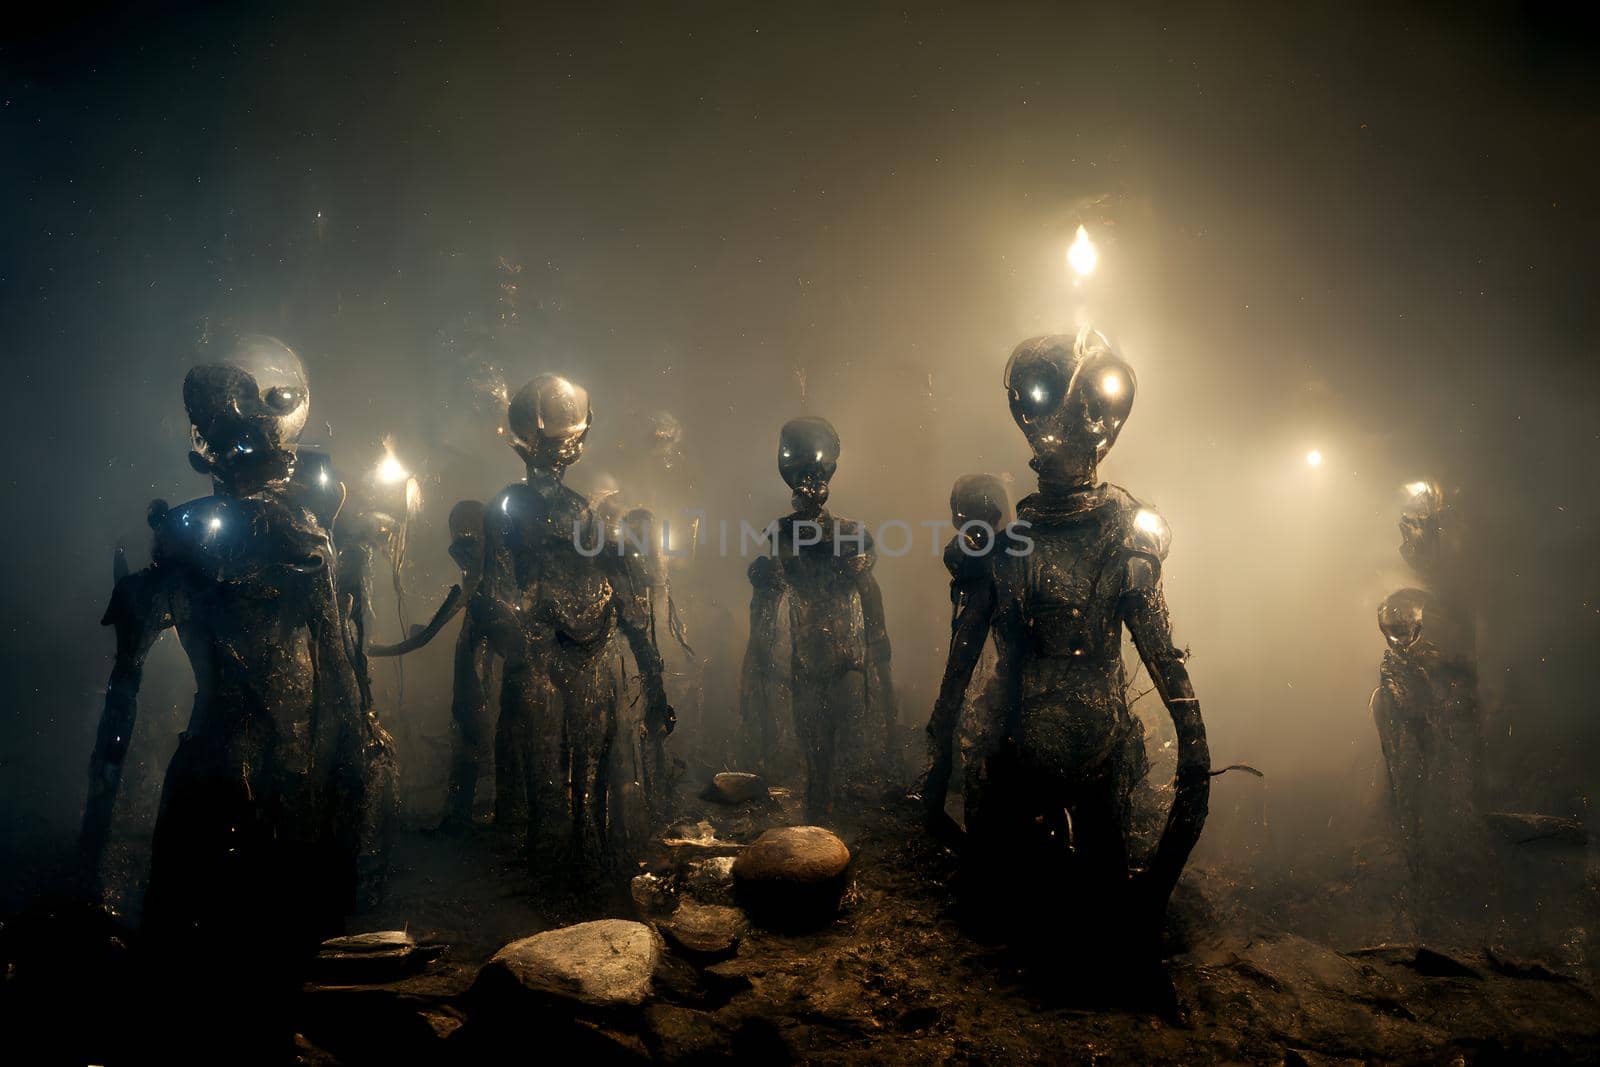 group of ugly barely humanoid aliens in ominous misty atmosphere, neural network generated art. Digitally generated image. Not based on any actual scene or pattern.